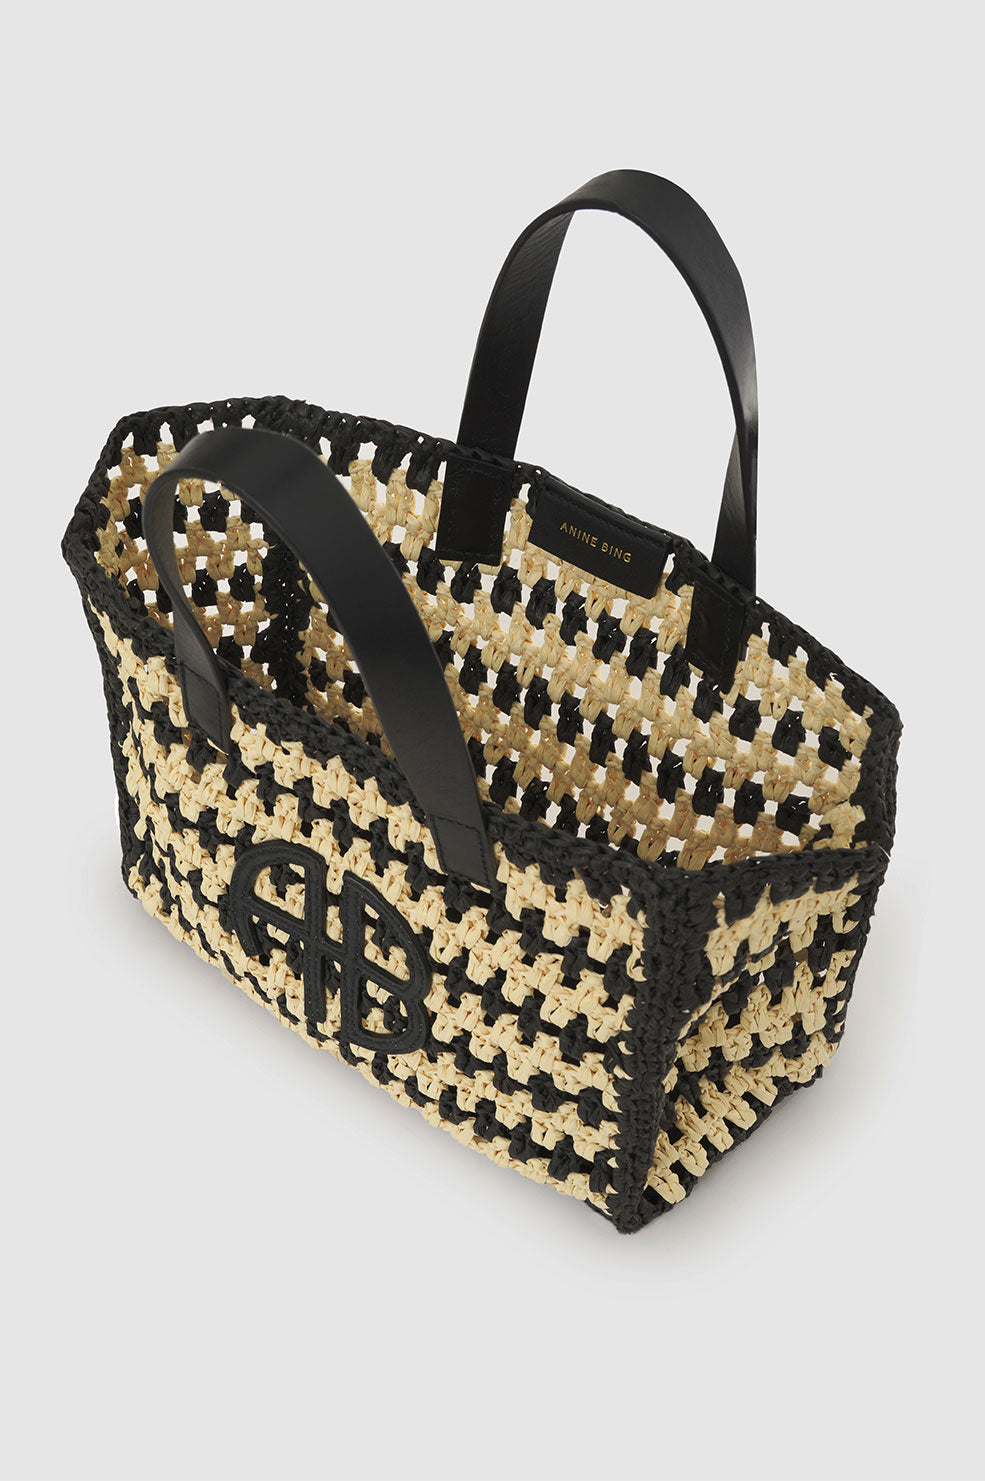 ANINE BING Small Rio Tote - Black And Natural Stripe - Inside View